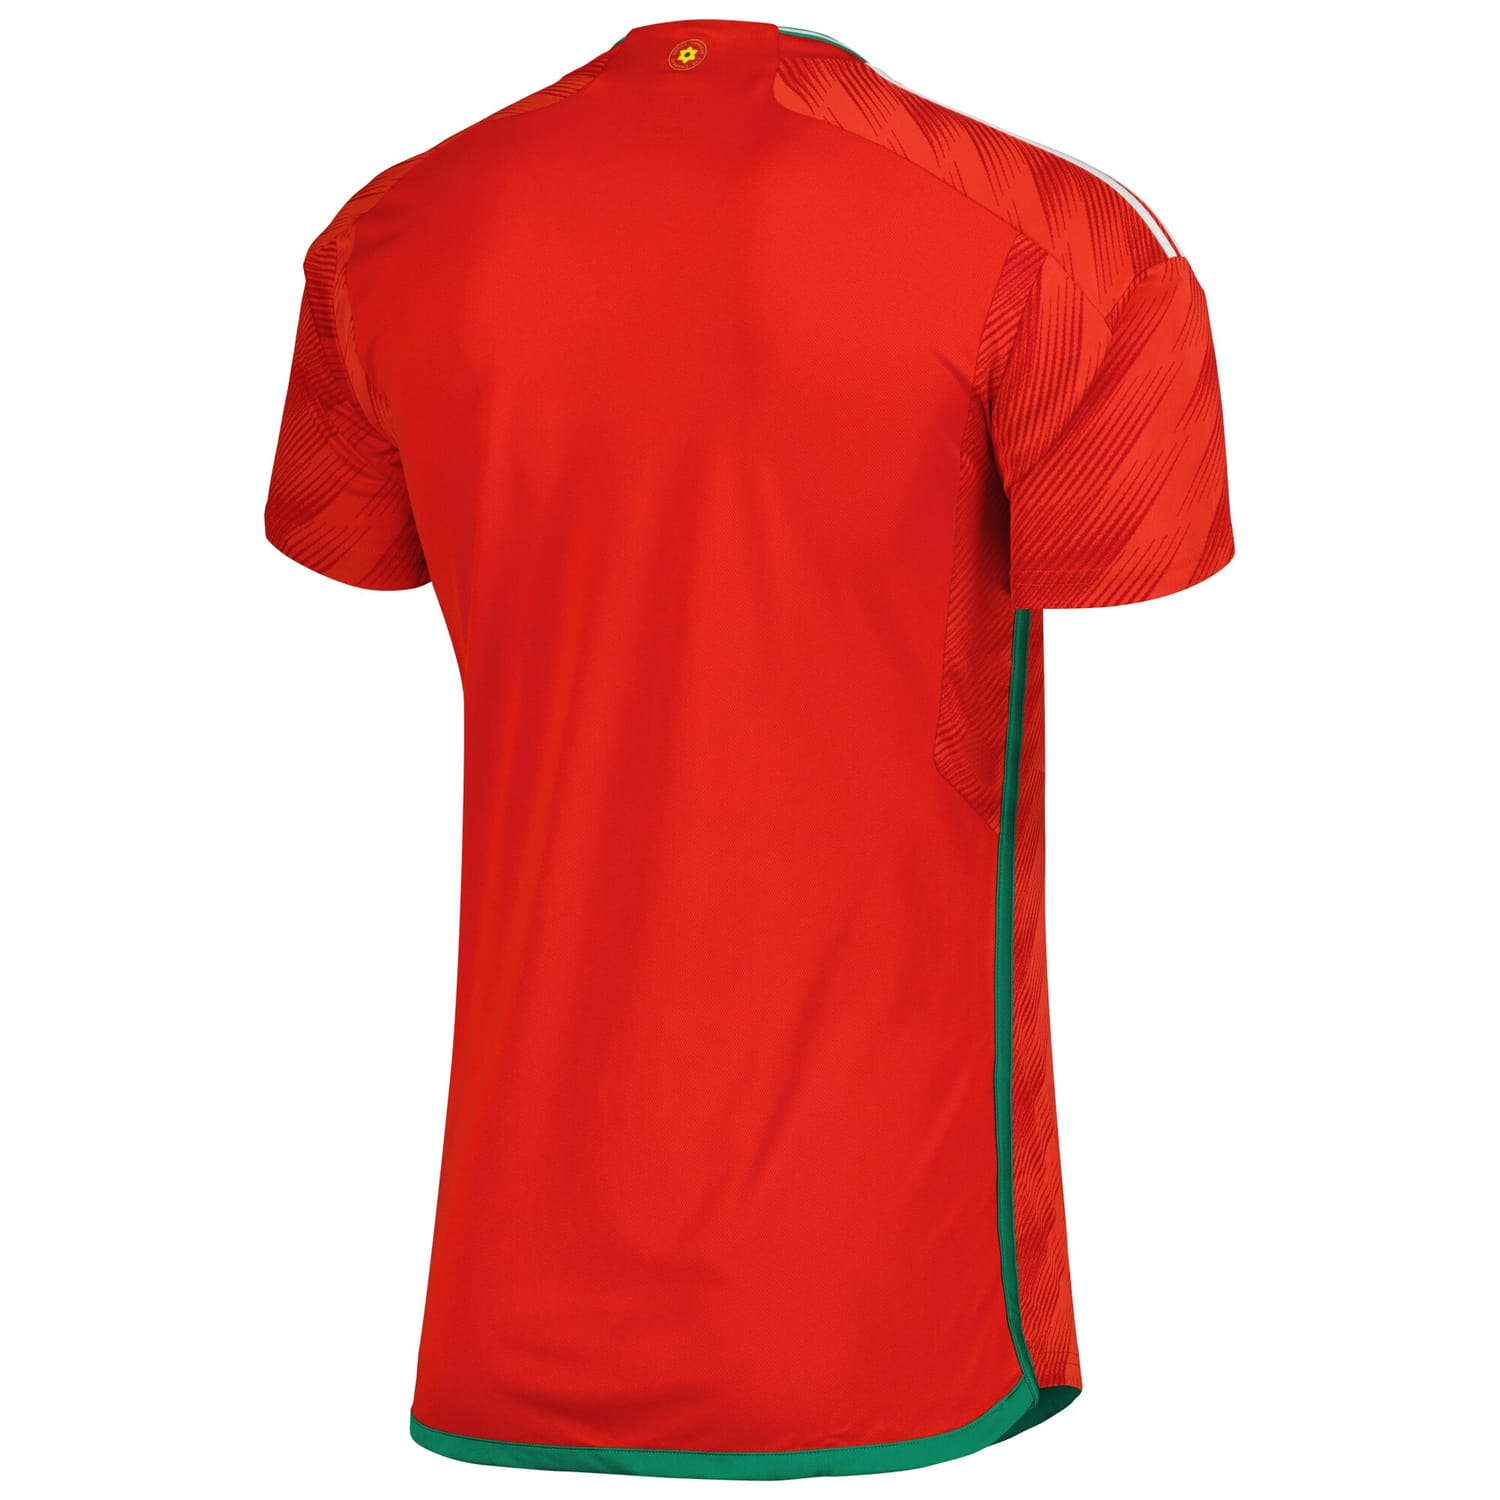 Wales National Team Home Jersey Shirt Red 2022-23 for Men